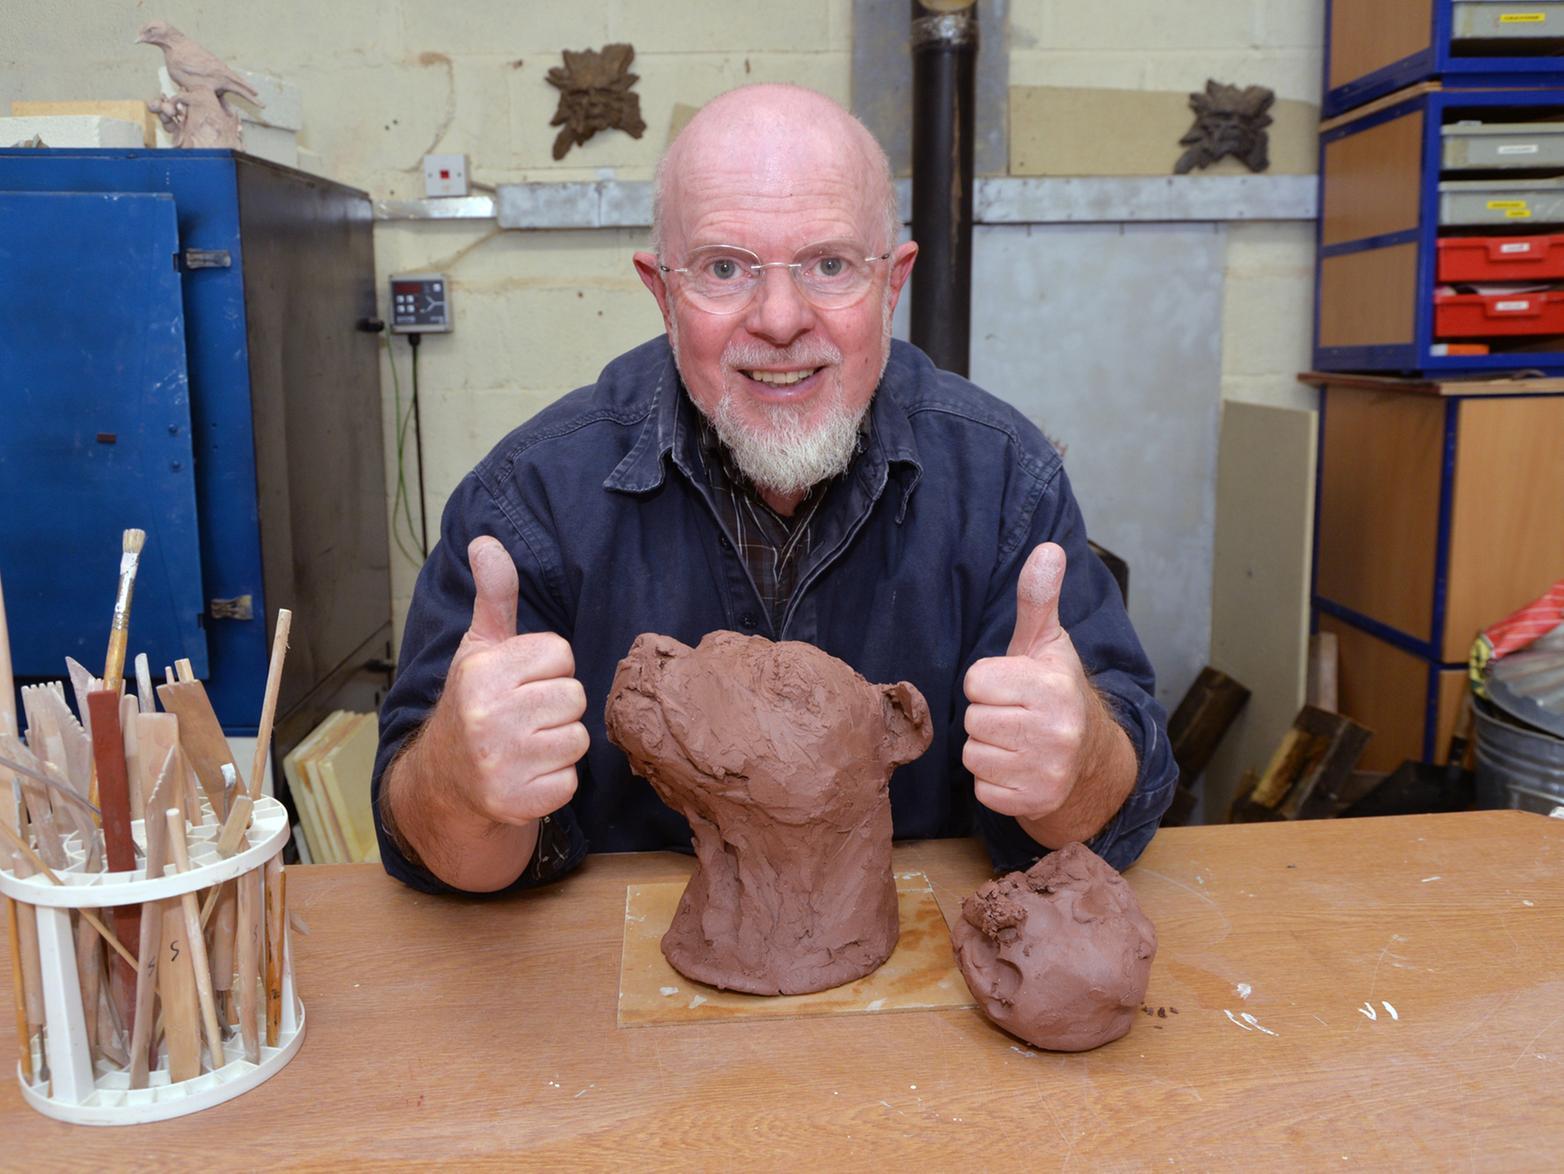 A retired art teacher from a village near Market Harborough has never looked back after making British medical history.
Bob Stafford, 71, has become the first patient in the UK to receive not one but TWO revolutionary implants for arthritic thumbs.
Hes gone on to carve out an exciting new career since the double operation  running one of the areas most outstanding pottery and ceramics studios.
Bob, of Wilbarston, told the Harborough Mail: The implants have transformed my life  theyve given me a whole new life.